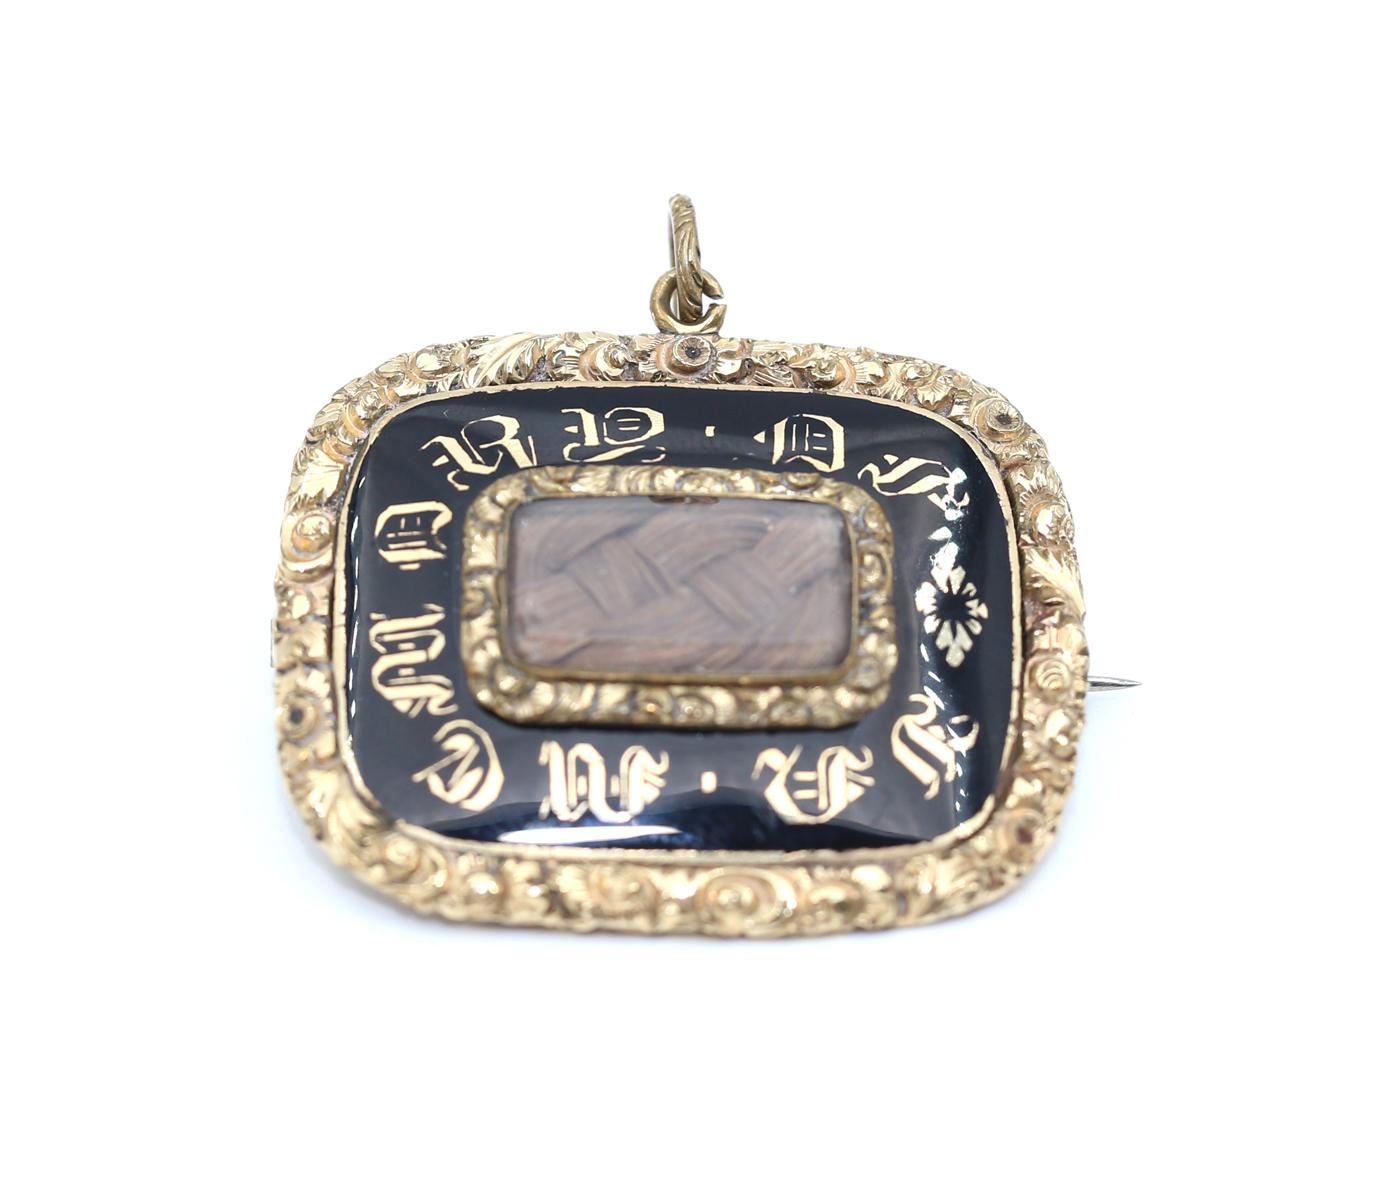 Massive and truly rare Gold brooch/pendant and black enamel.
Victorian  Yellow Gold Mourning Brooch Pendant. Created around 1849. 

The Victorian epoch is well known for its great attention to mourning. This pendant brooch is a perfect example. It